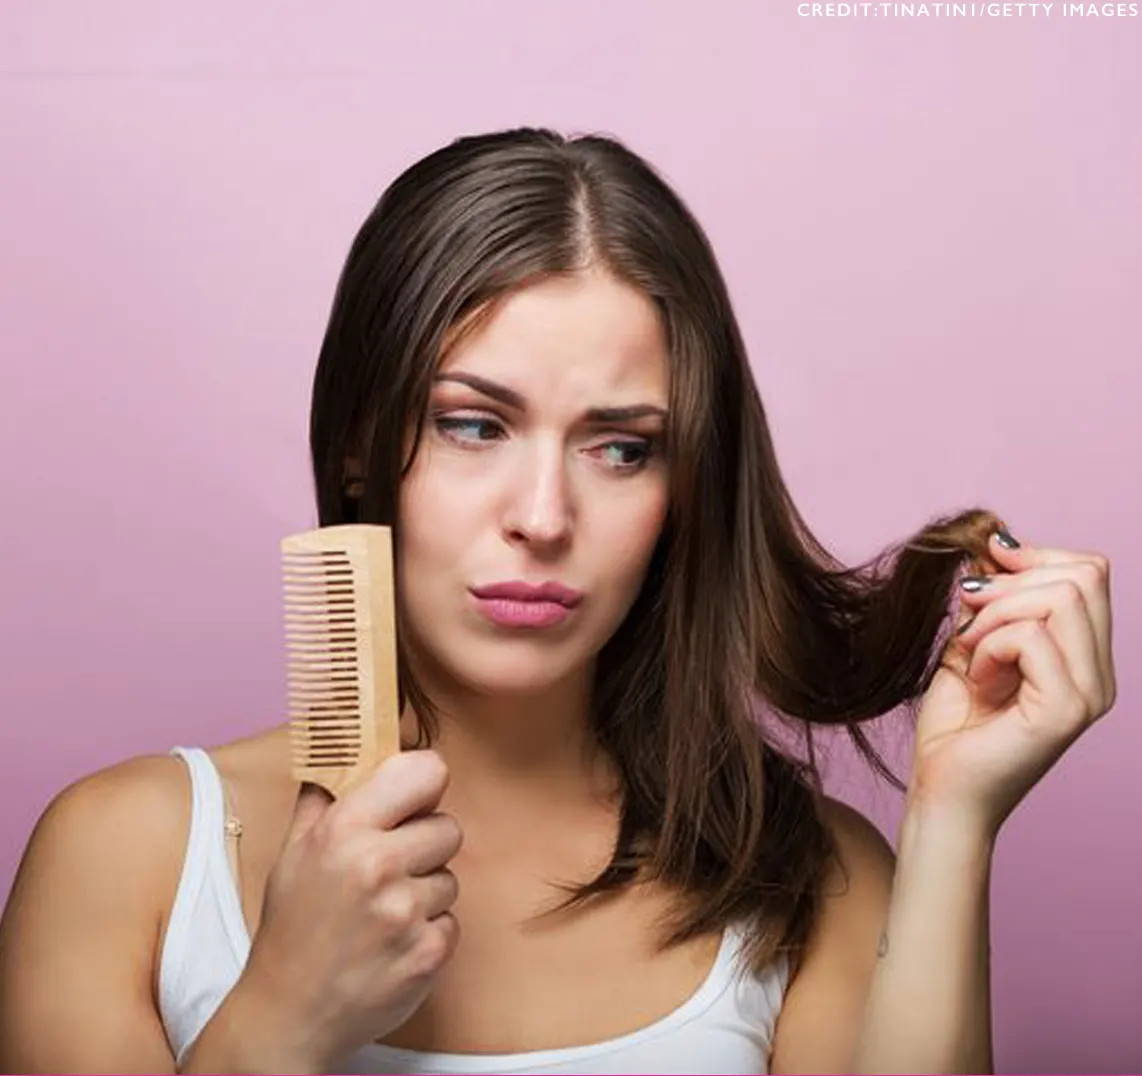 5 Things That Are Damaging Your Hair